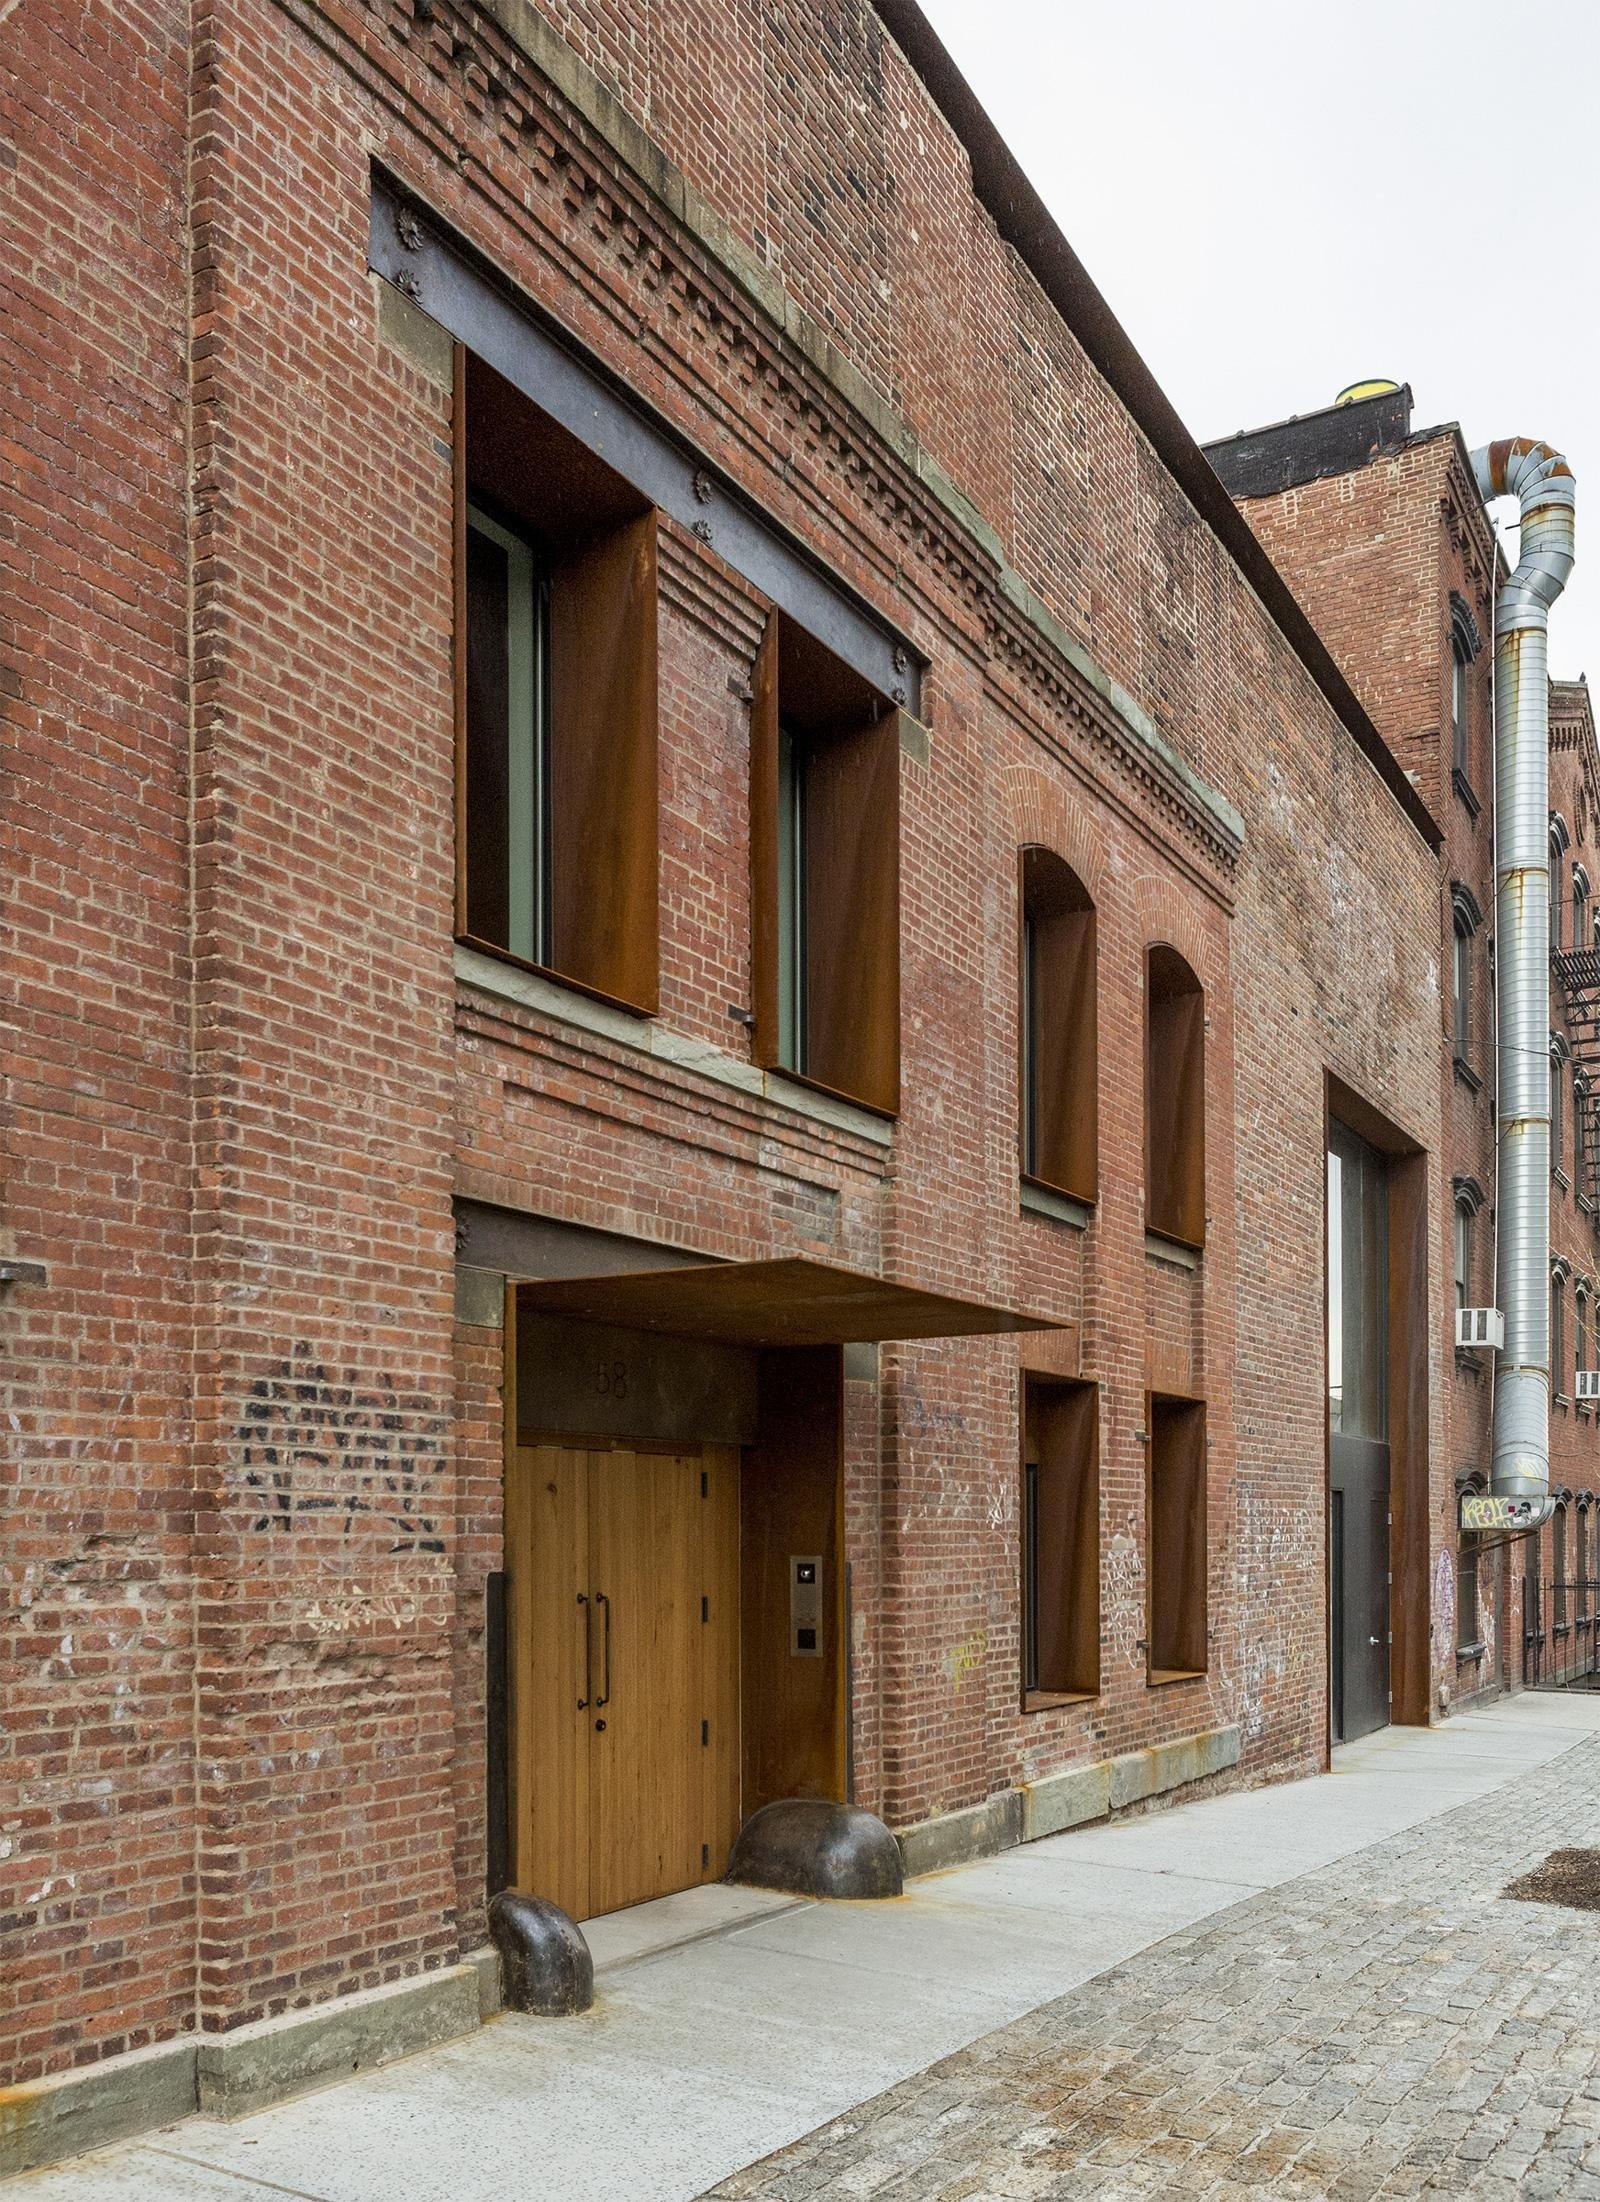 The Methods Behind Historic Building Preservation